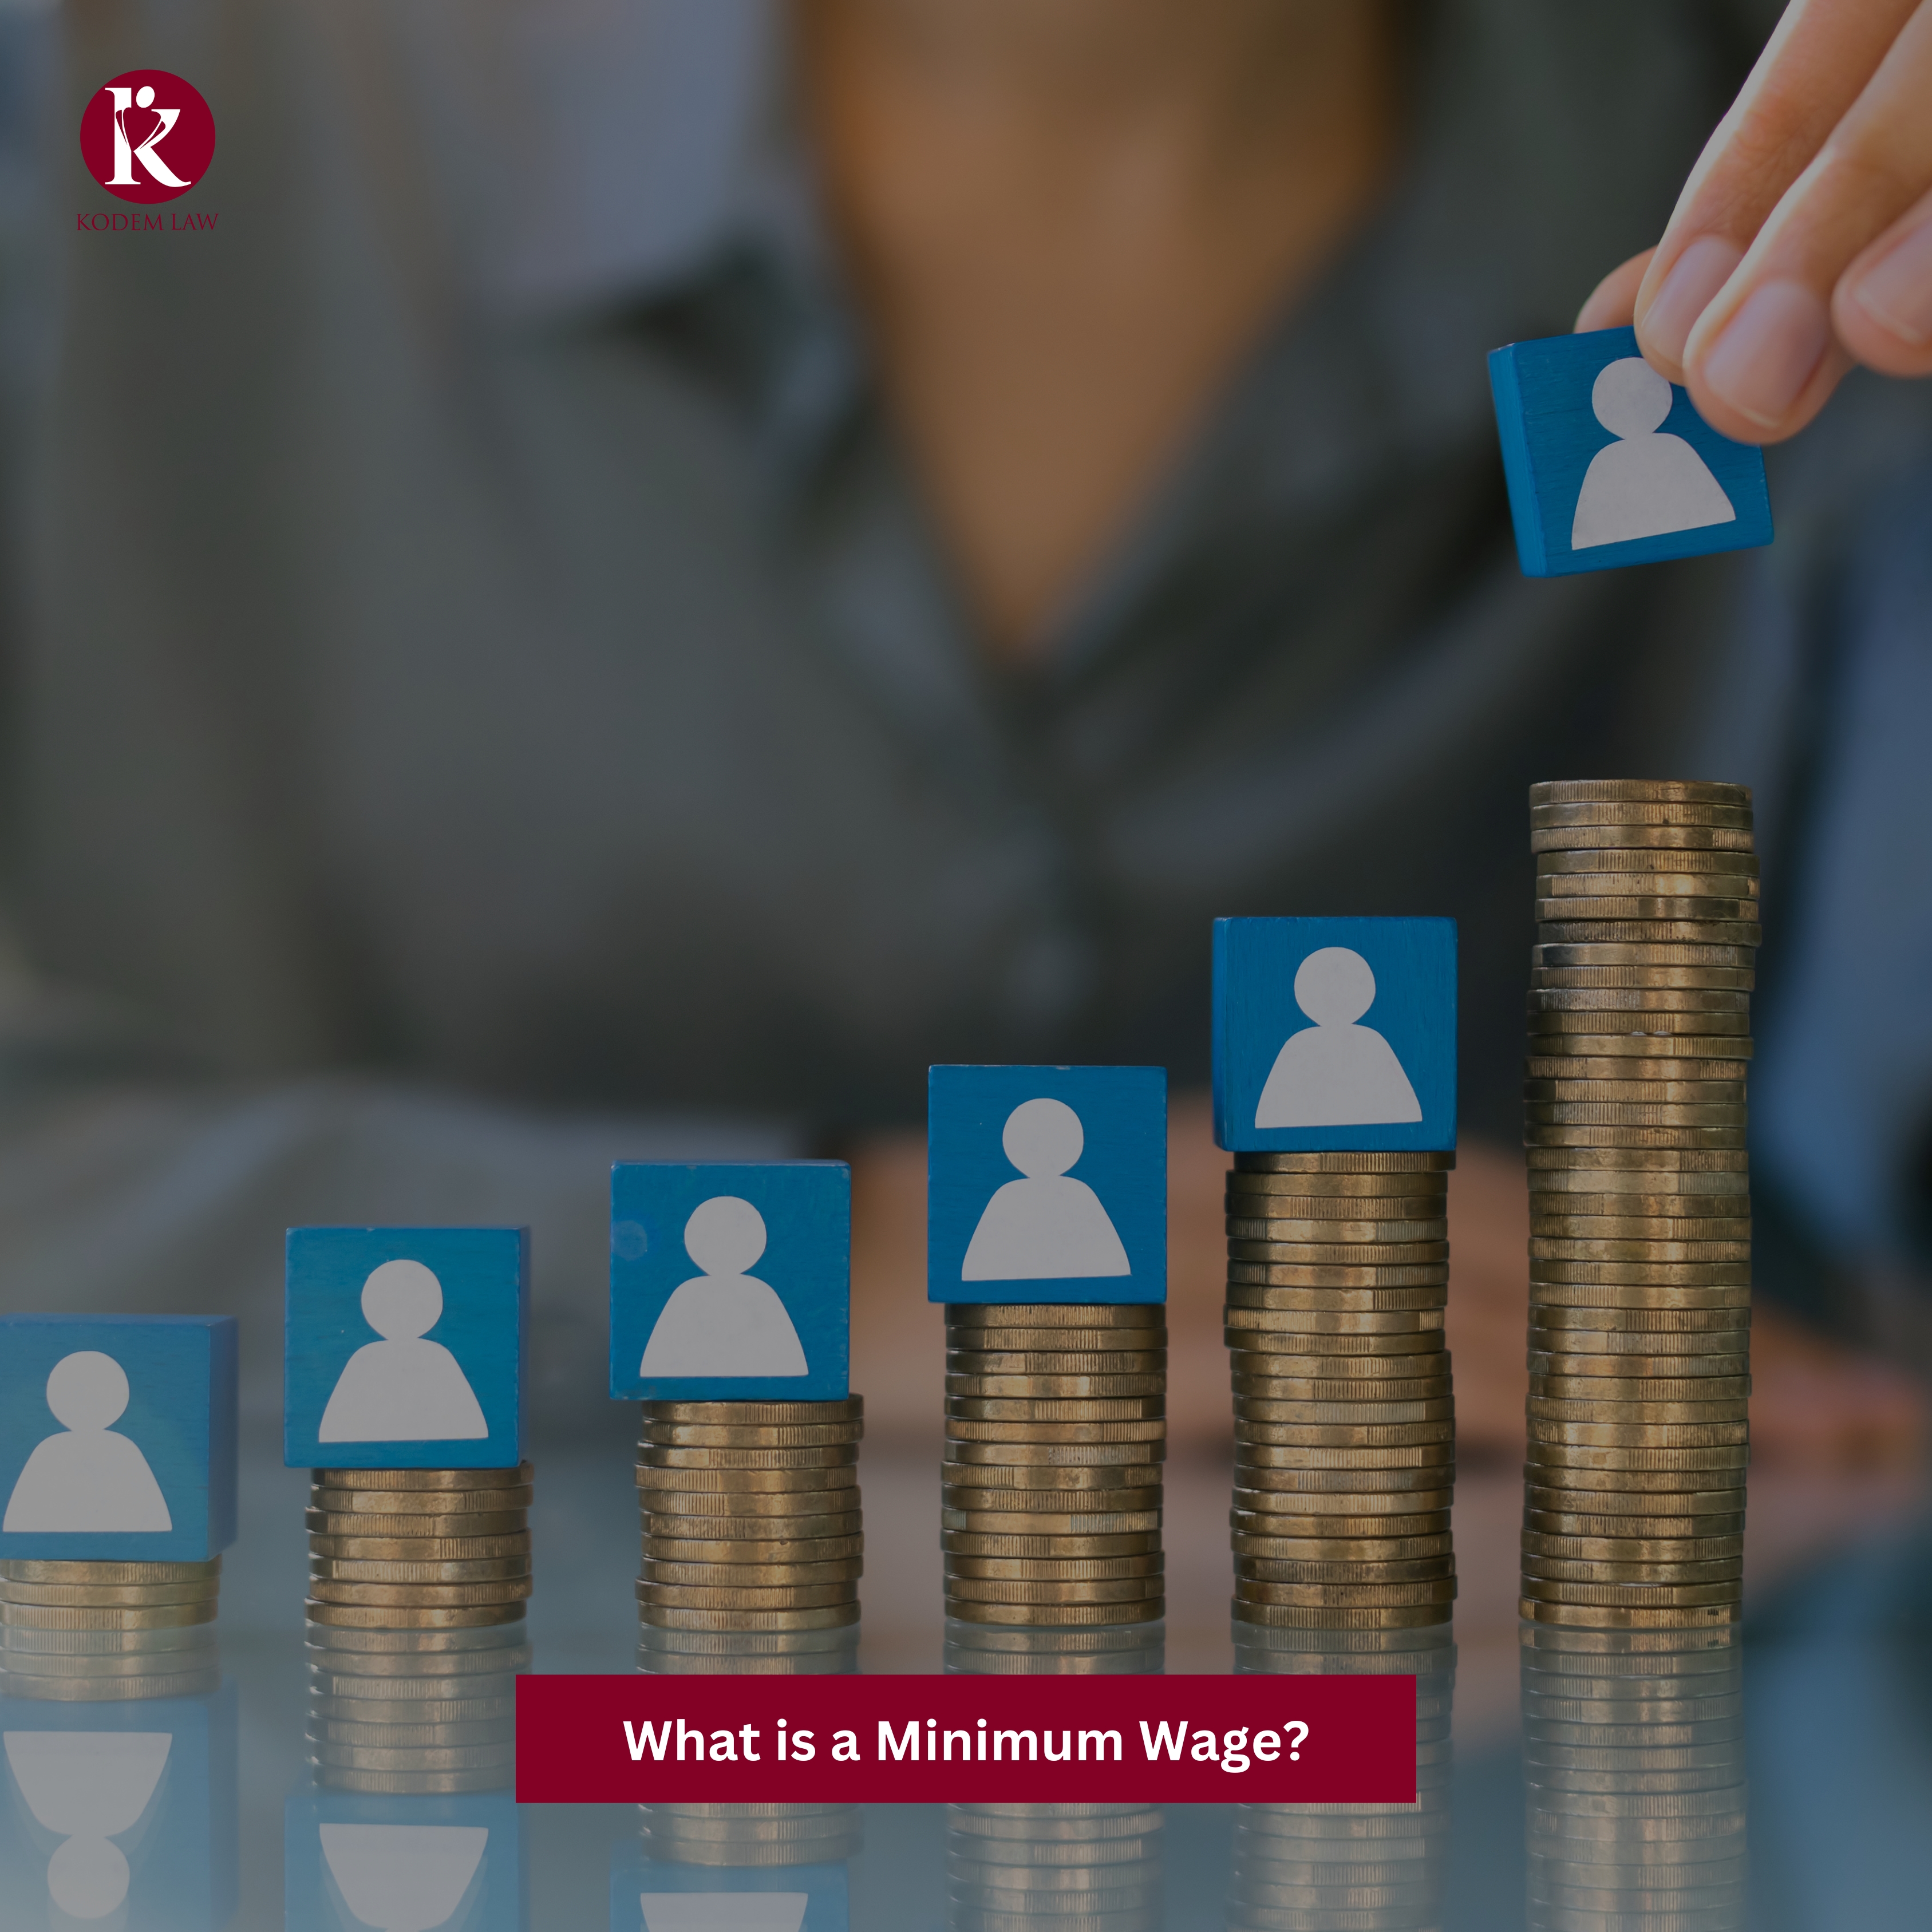 What is a Minimum Wage?